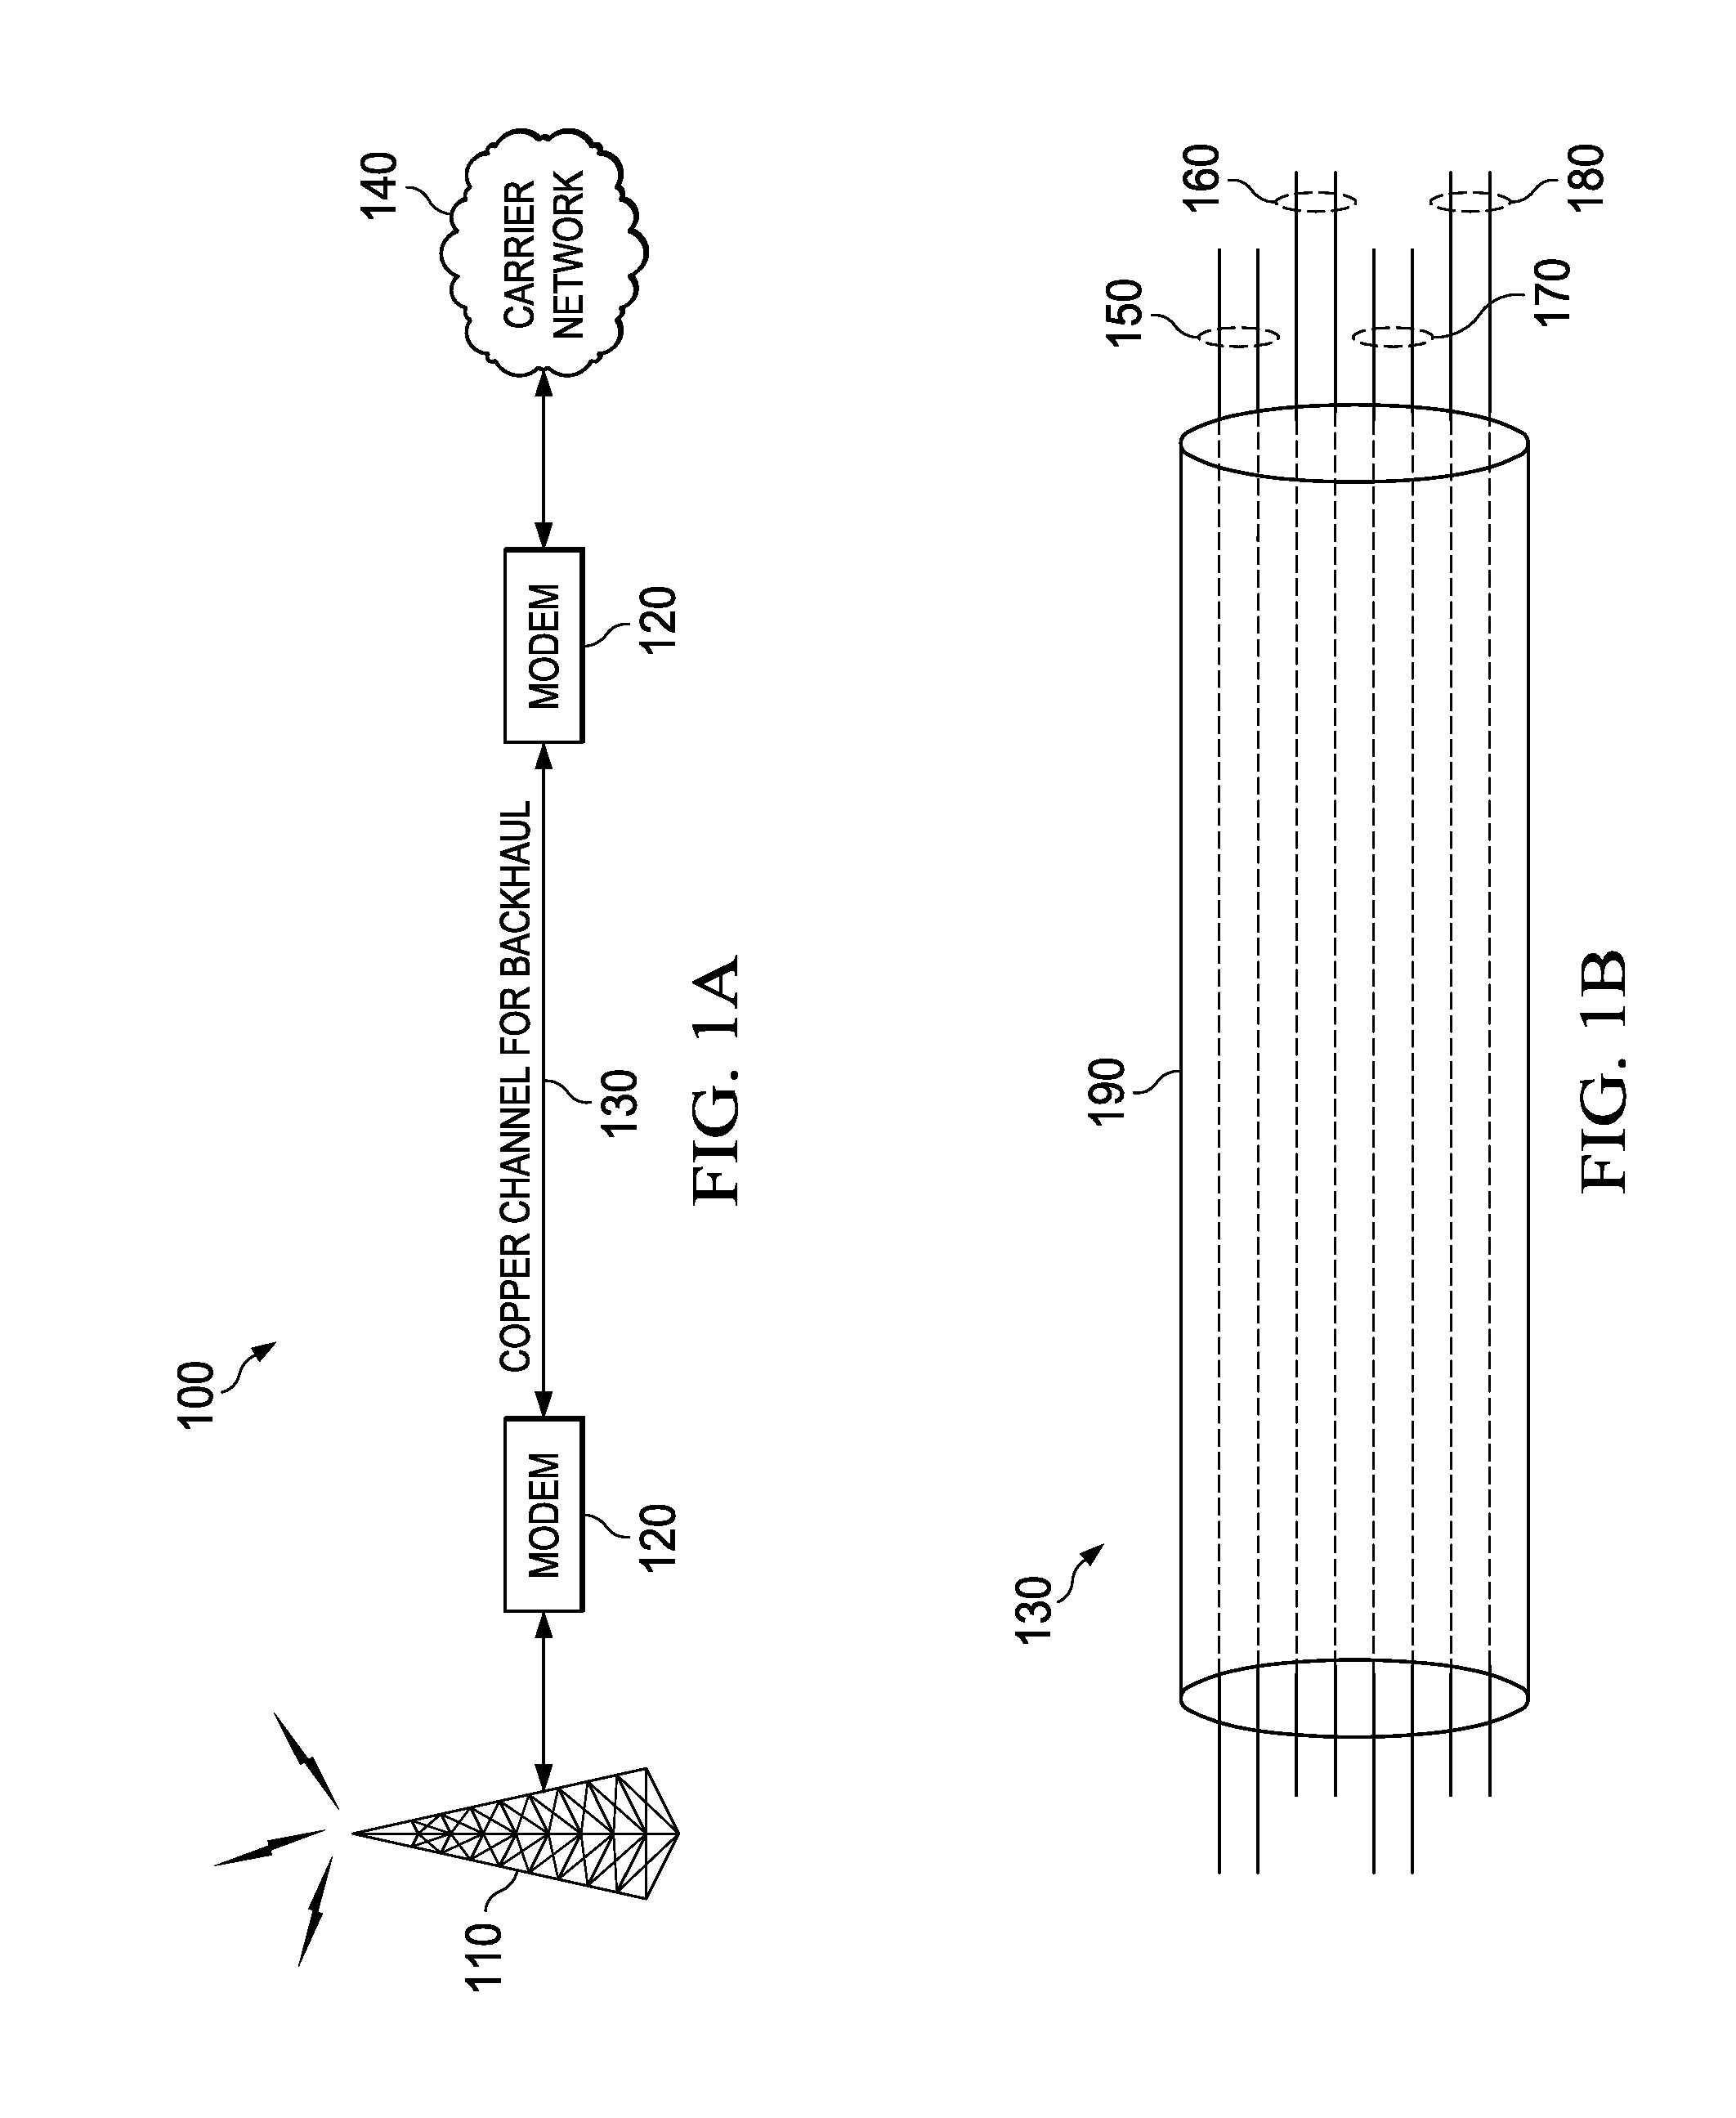 Processor, modem and method for cancelling alien noise in coordinated digital subscriber lines